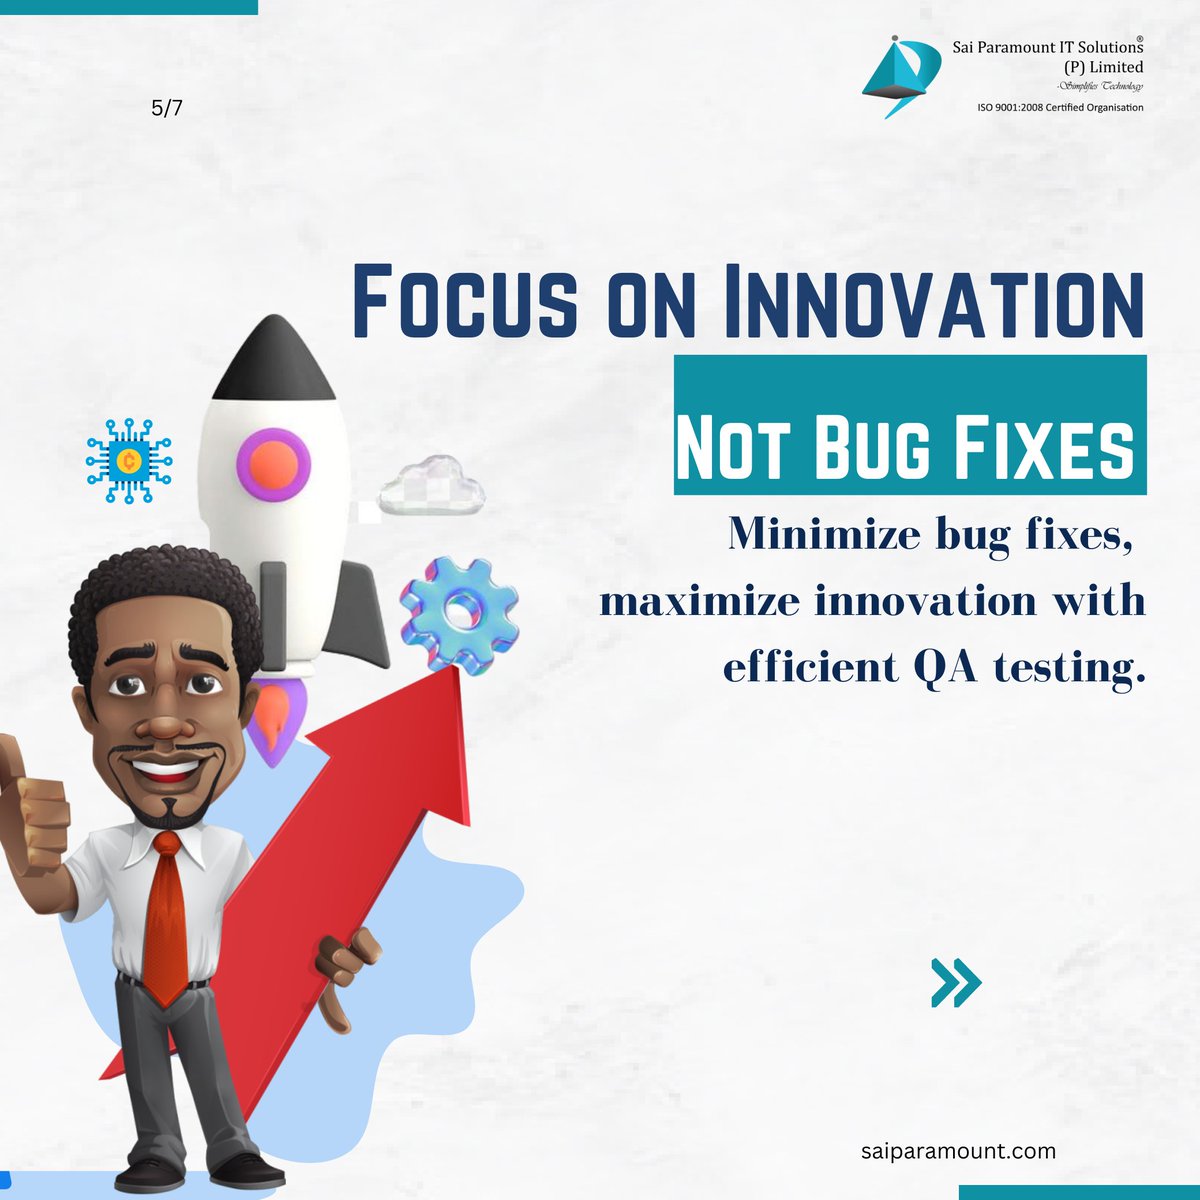 Don't let bugs eat into your profits! Invest in QA testing and watch your ROI grow like a money tree.
.
.
.
#qatesting #savemoney #increaserevenue #SmartInvesting #testing #software #softwaretesting #spis